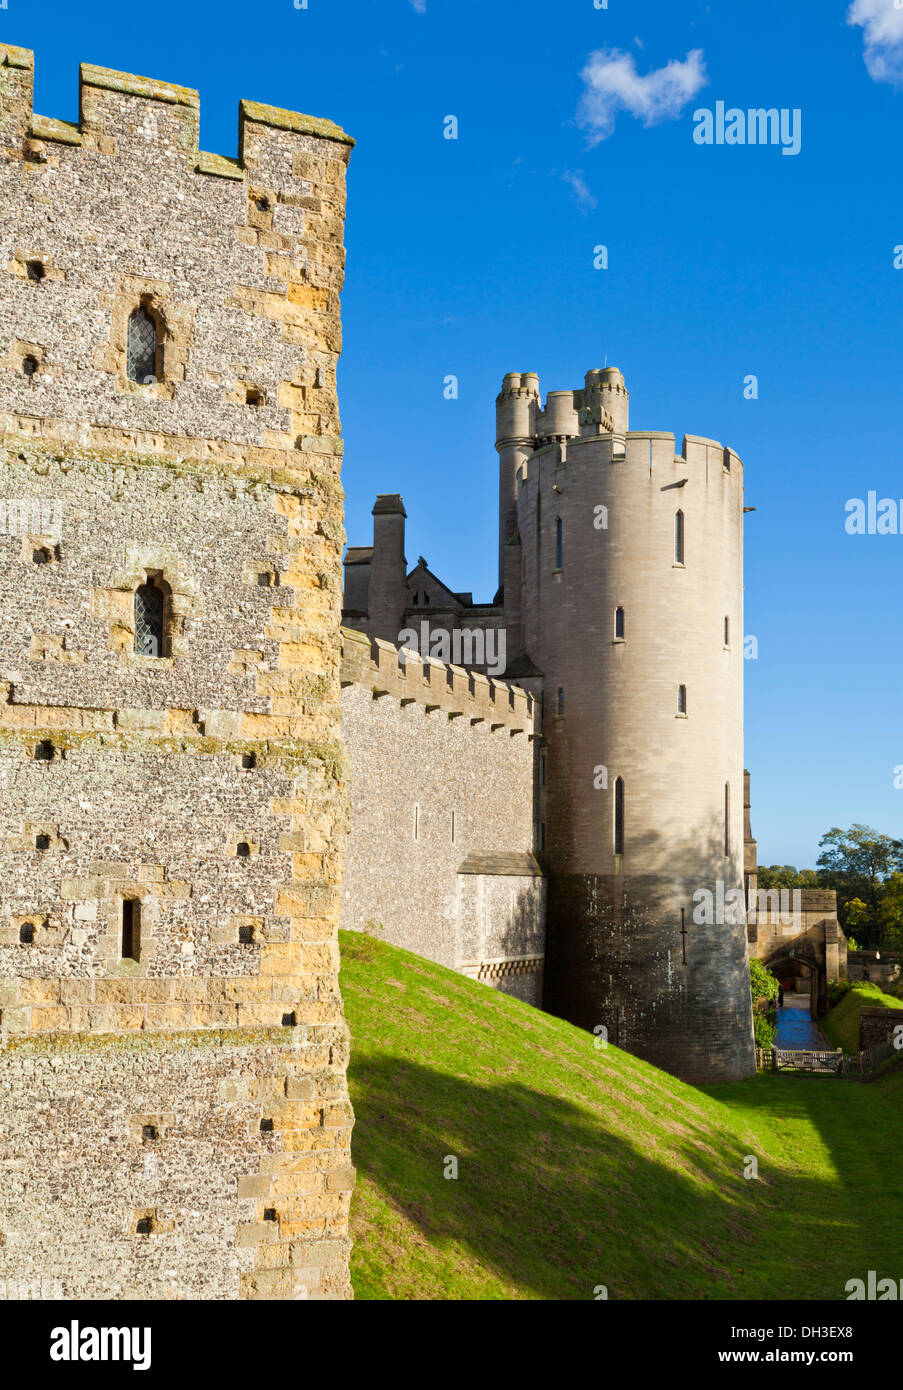 Arundel castle walls and battlements of the seat of the Duke of Norfolk Arundel West Sussex England UK GB  Europe Stock Photo